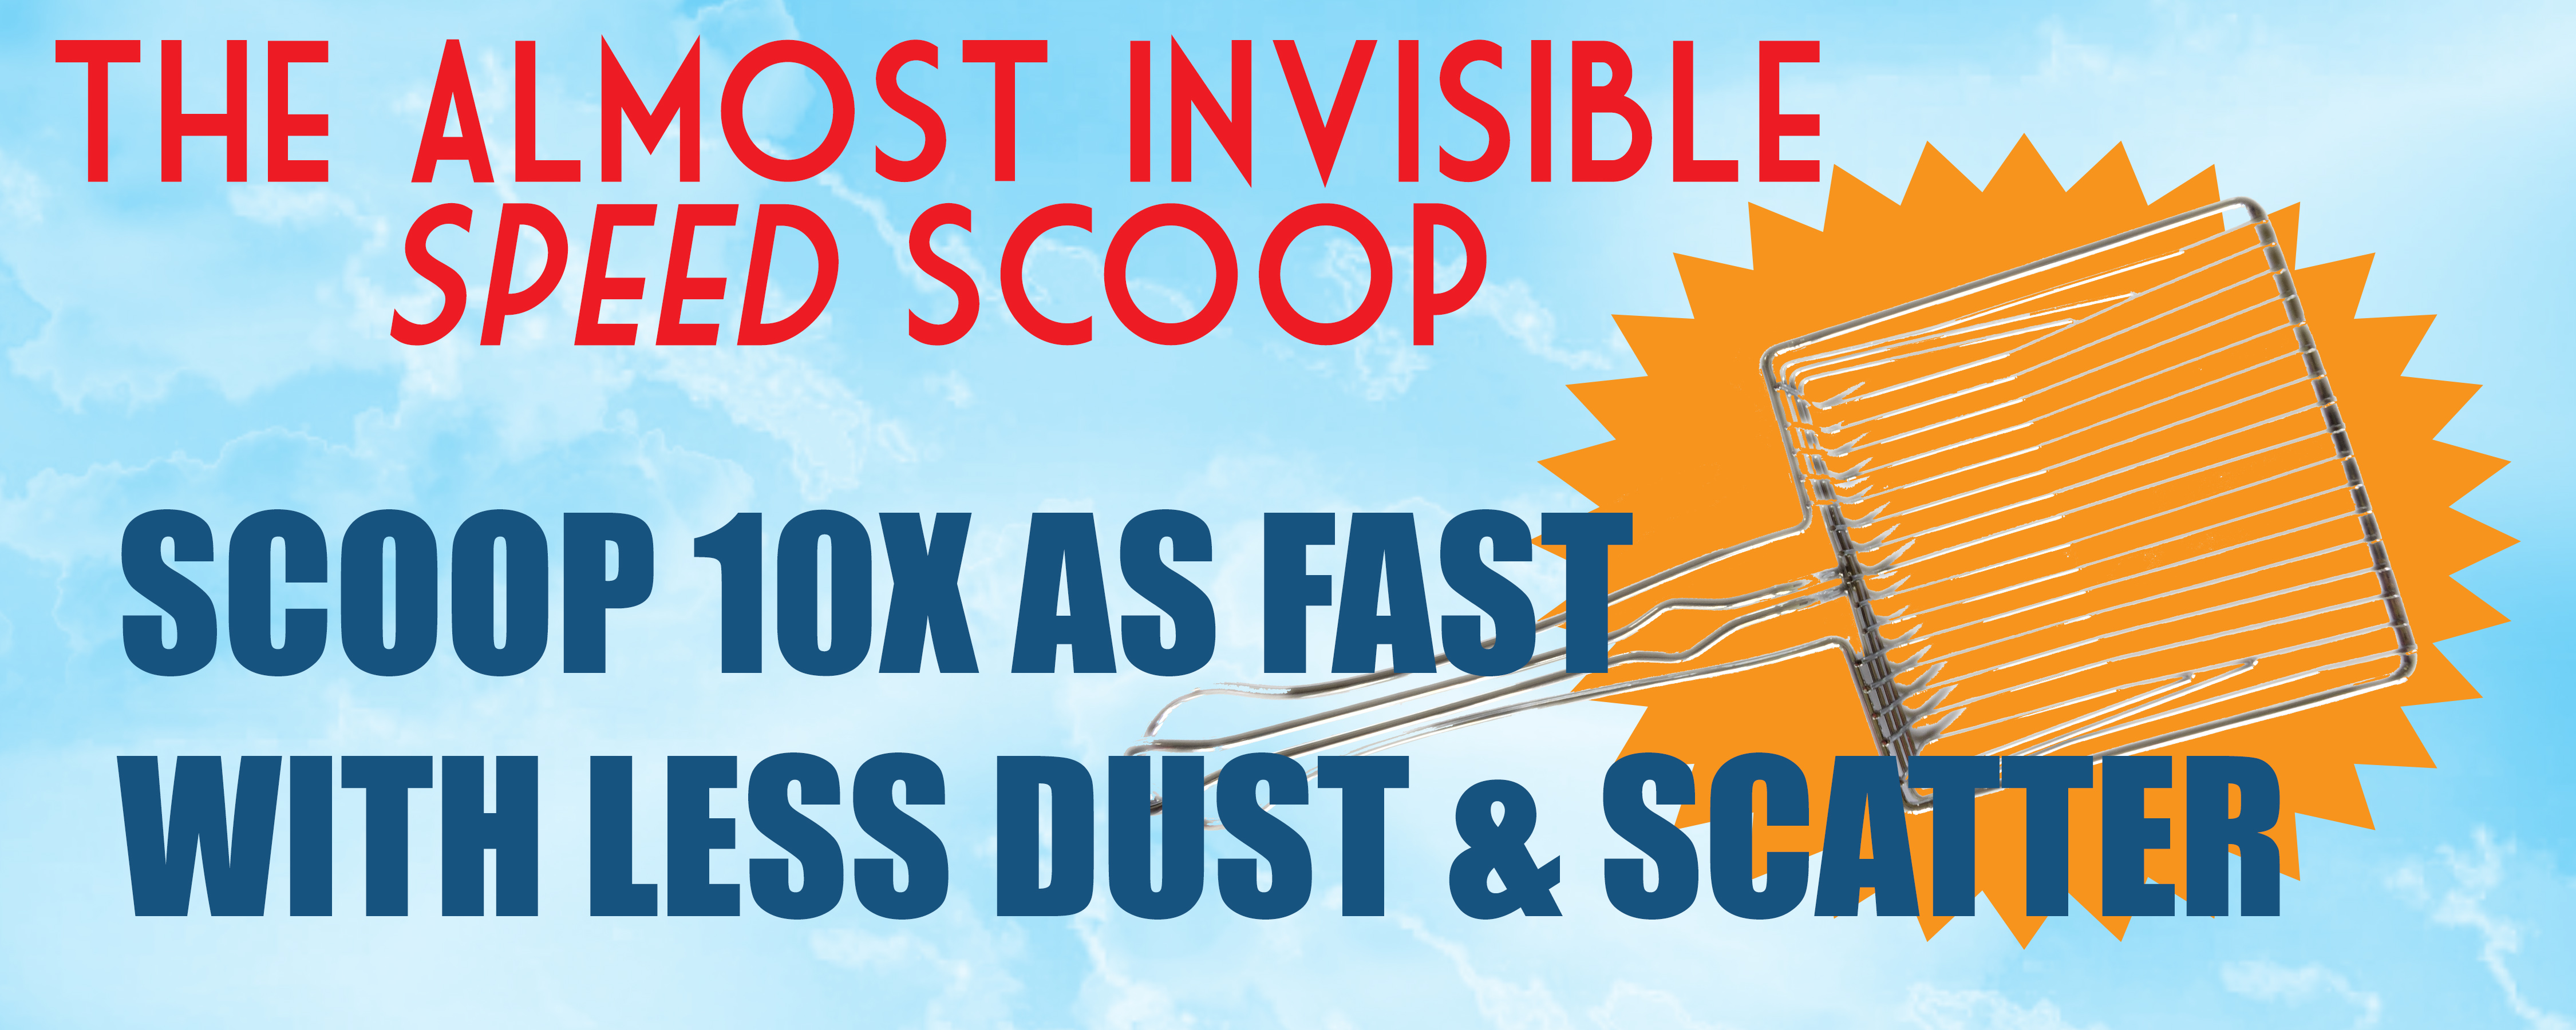 almost-invisible-speed-scoop.jpg